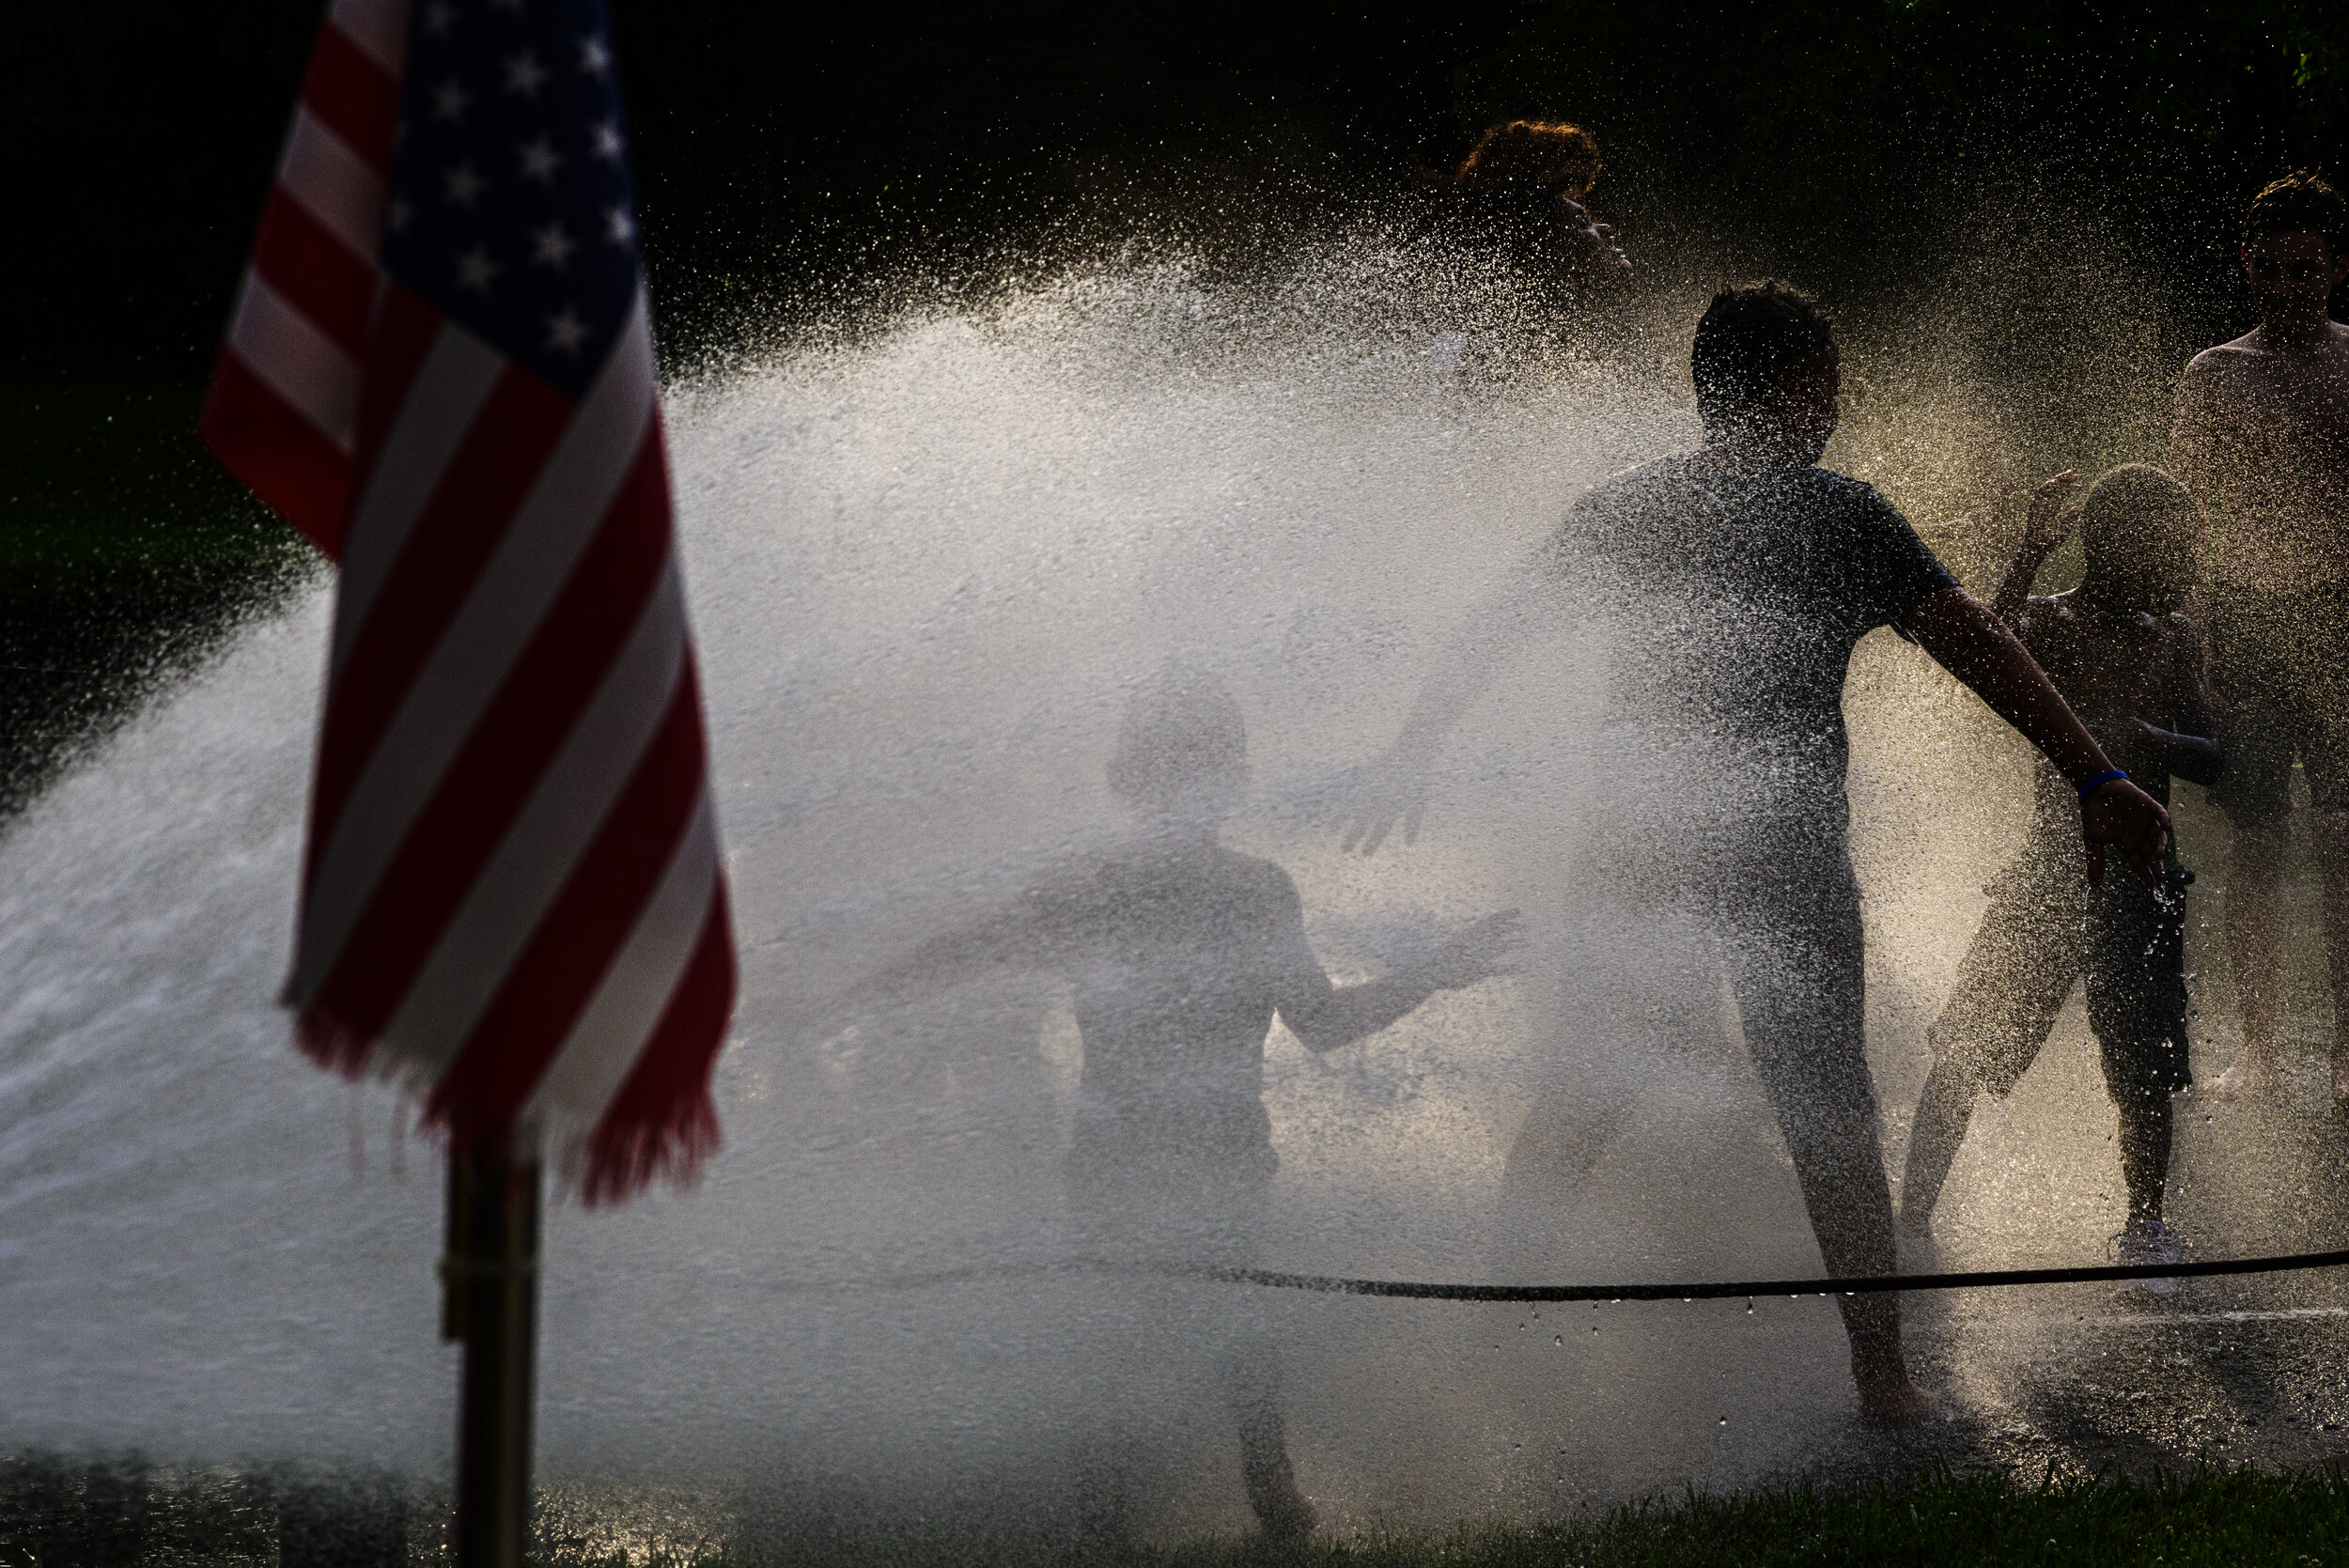  Ezra Smith, 5, runs through the cool water being sprayed by a firehose during a Juneteenth Block Party at Sherman Oliver Ross Park in Cynthiana, Kentucky on Saturday, June 19, 2021.   The event marked the first celebration of Juneteenth in Cynthiana